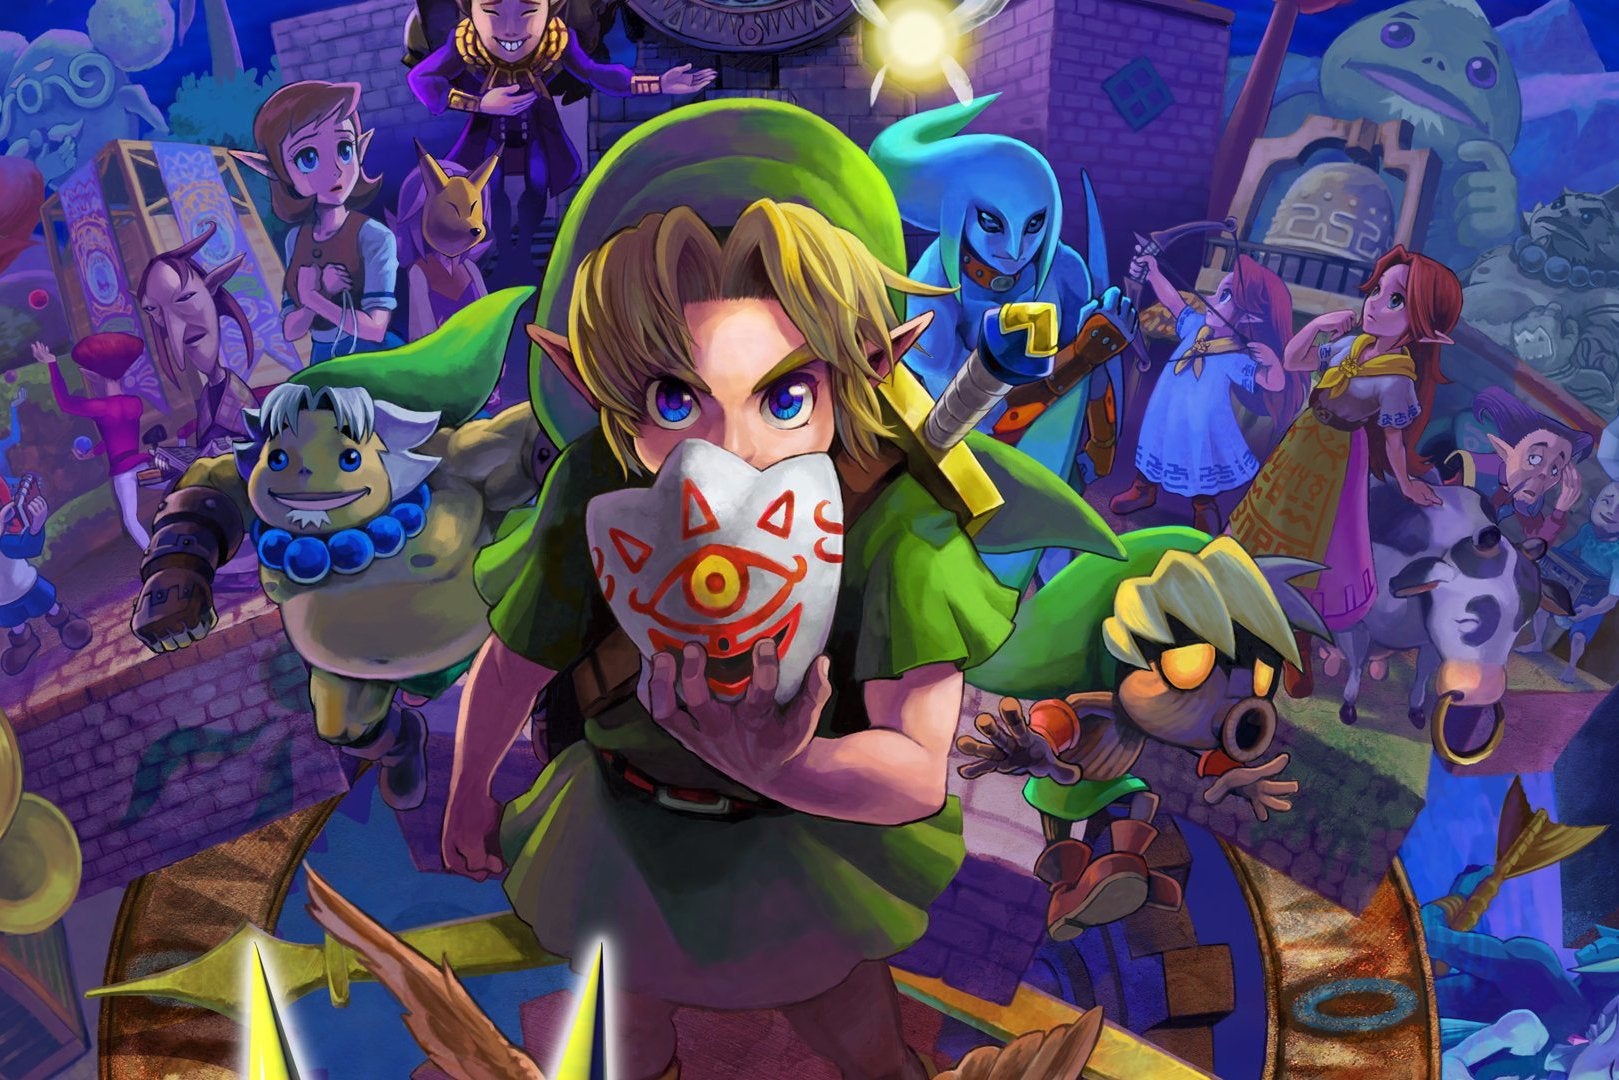 Image for Majora's Mask 3D bests Evolve in February US retail sales